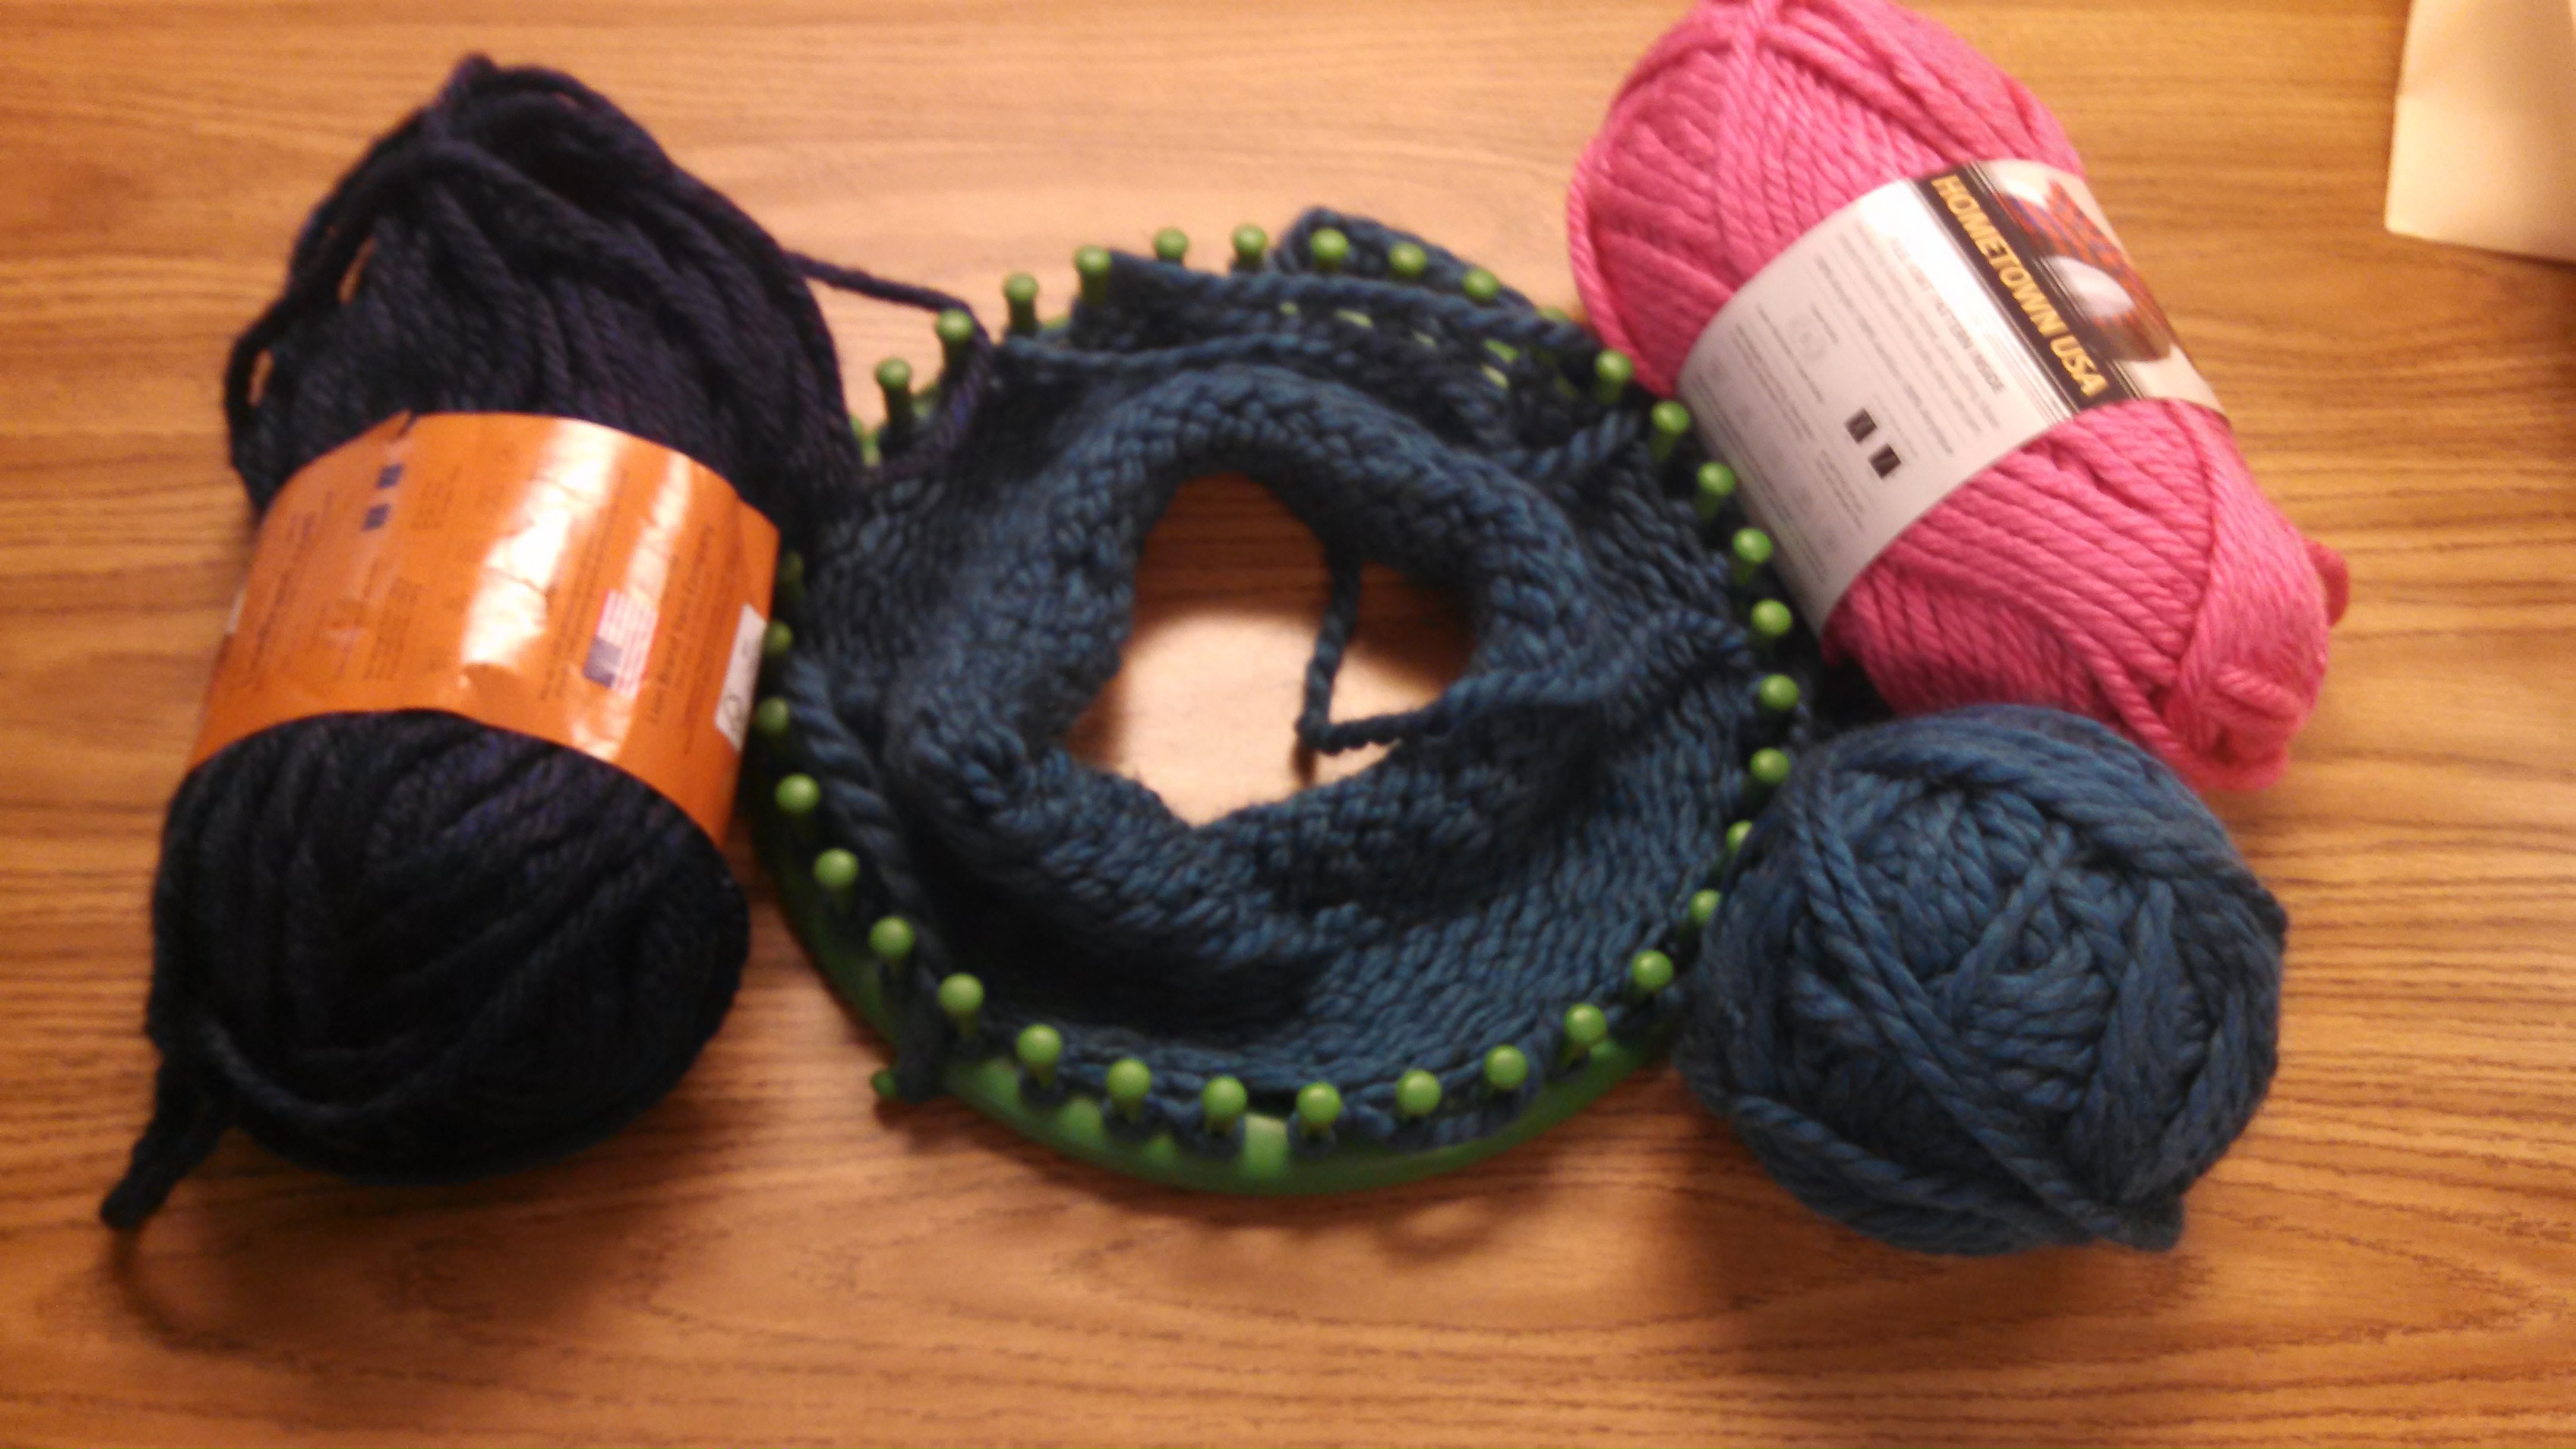 Yarn and a loom for cap making